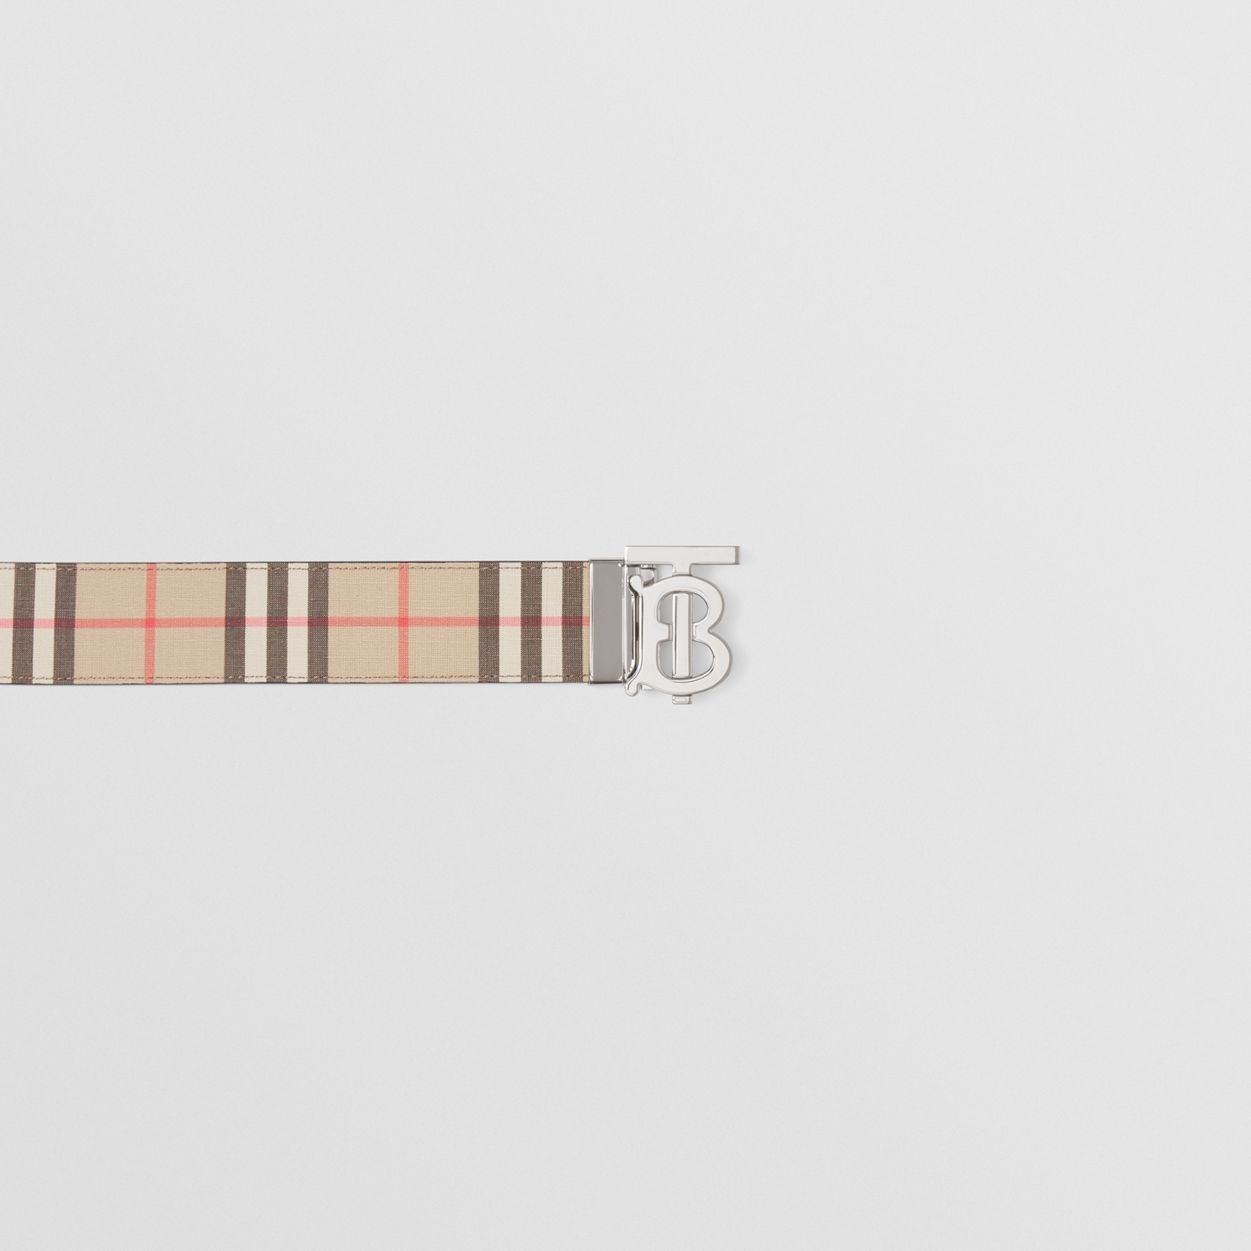 Burberry Monogram Motif Vintage Check E-canvas Belt 1.4 Width Archive Beige  in Thermoplastic Polyurethane with Gold-tone - US